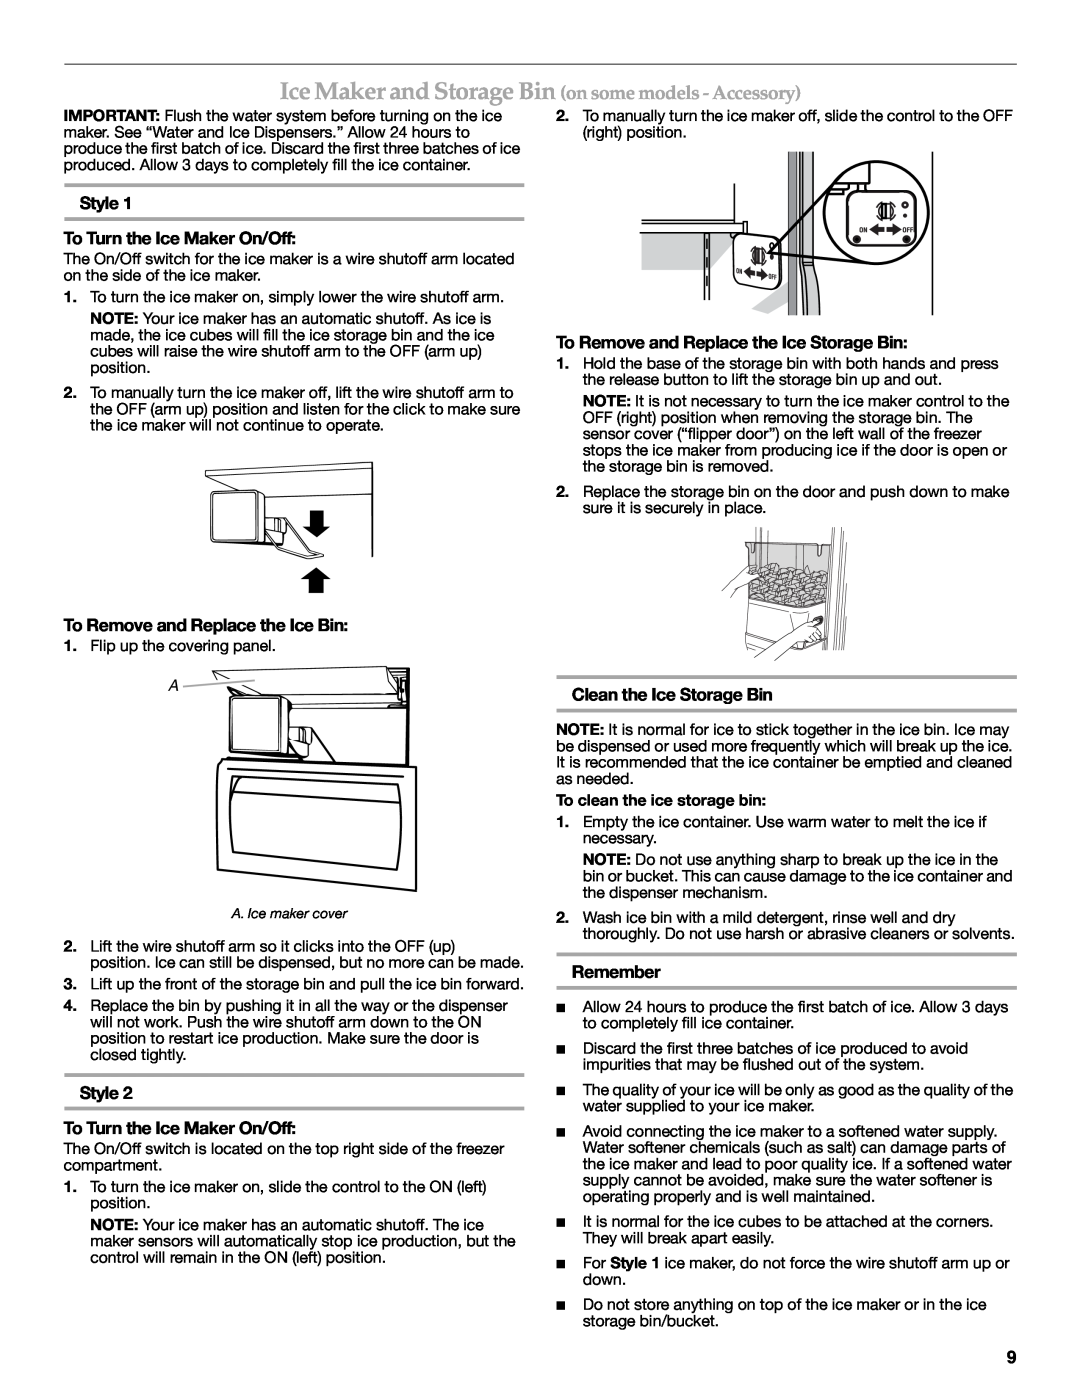 KitchenAid W10303989A Ice Maker and Storage Bin on some models - Accessory, Style To Turn the Ice Maker On/Off, Remember 